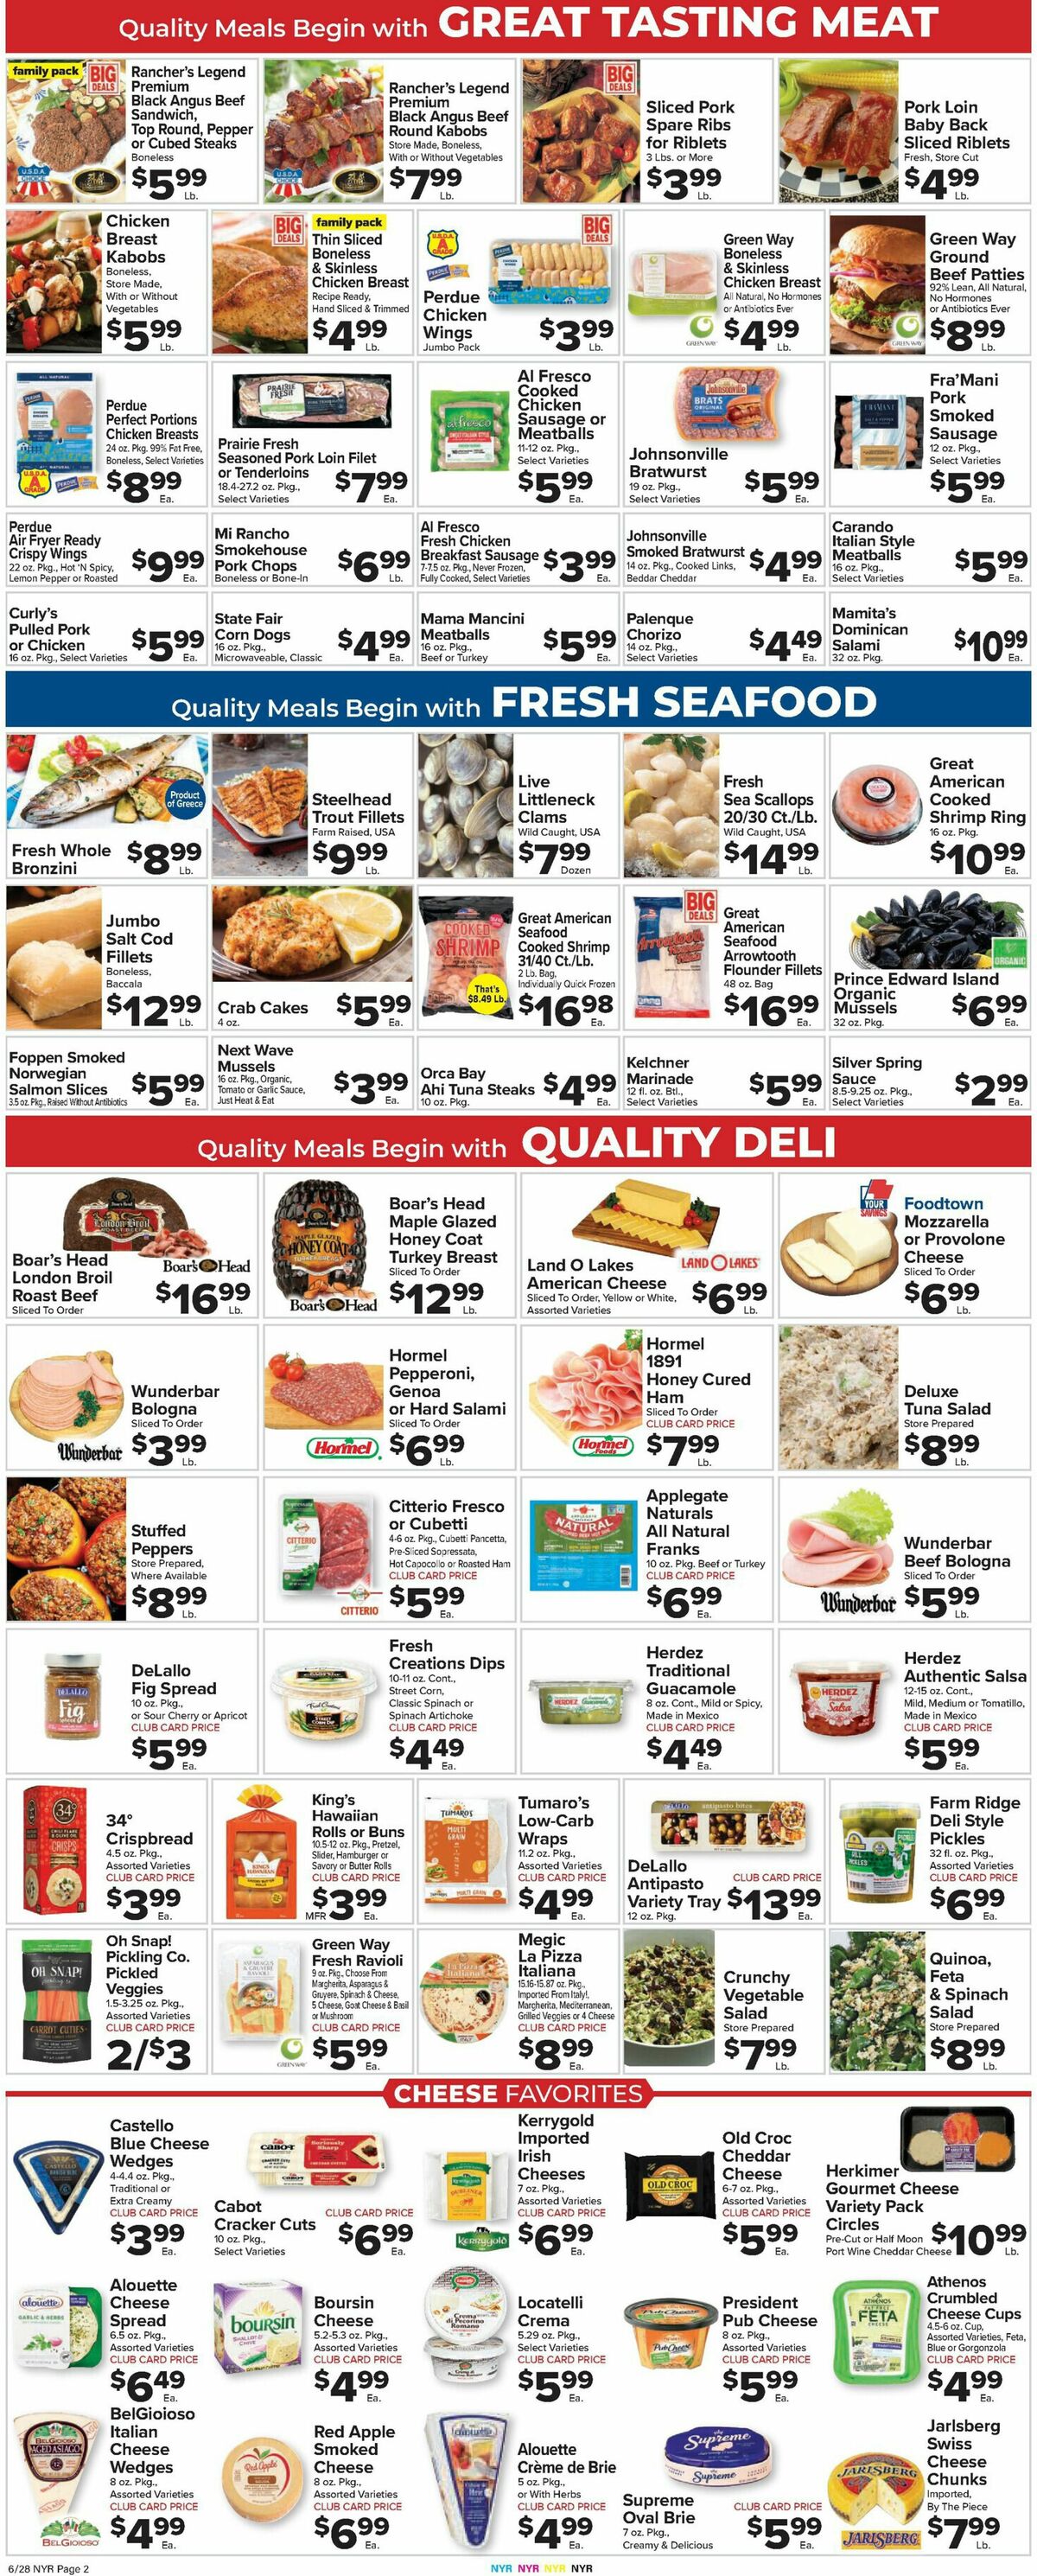 Food Town Weekly Ad from June 28